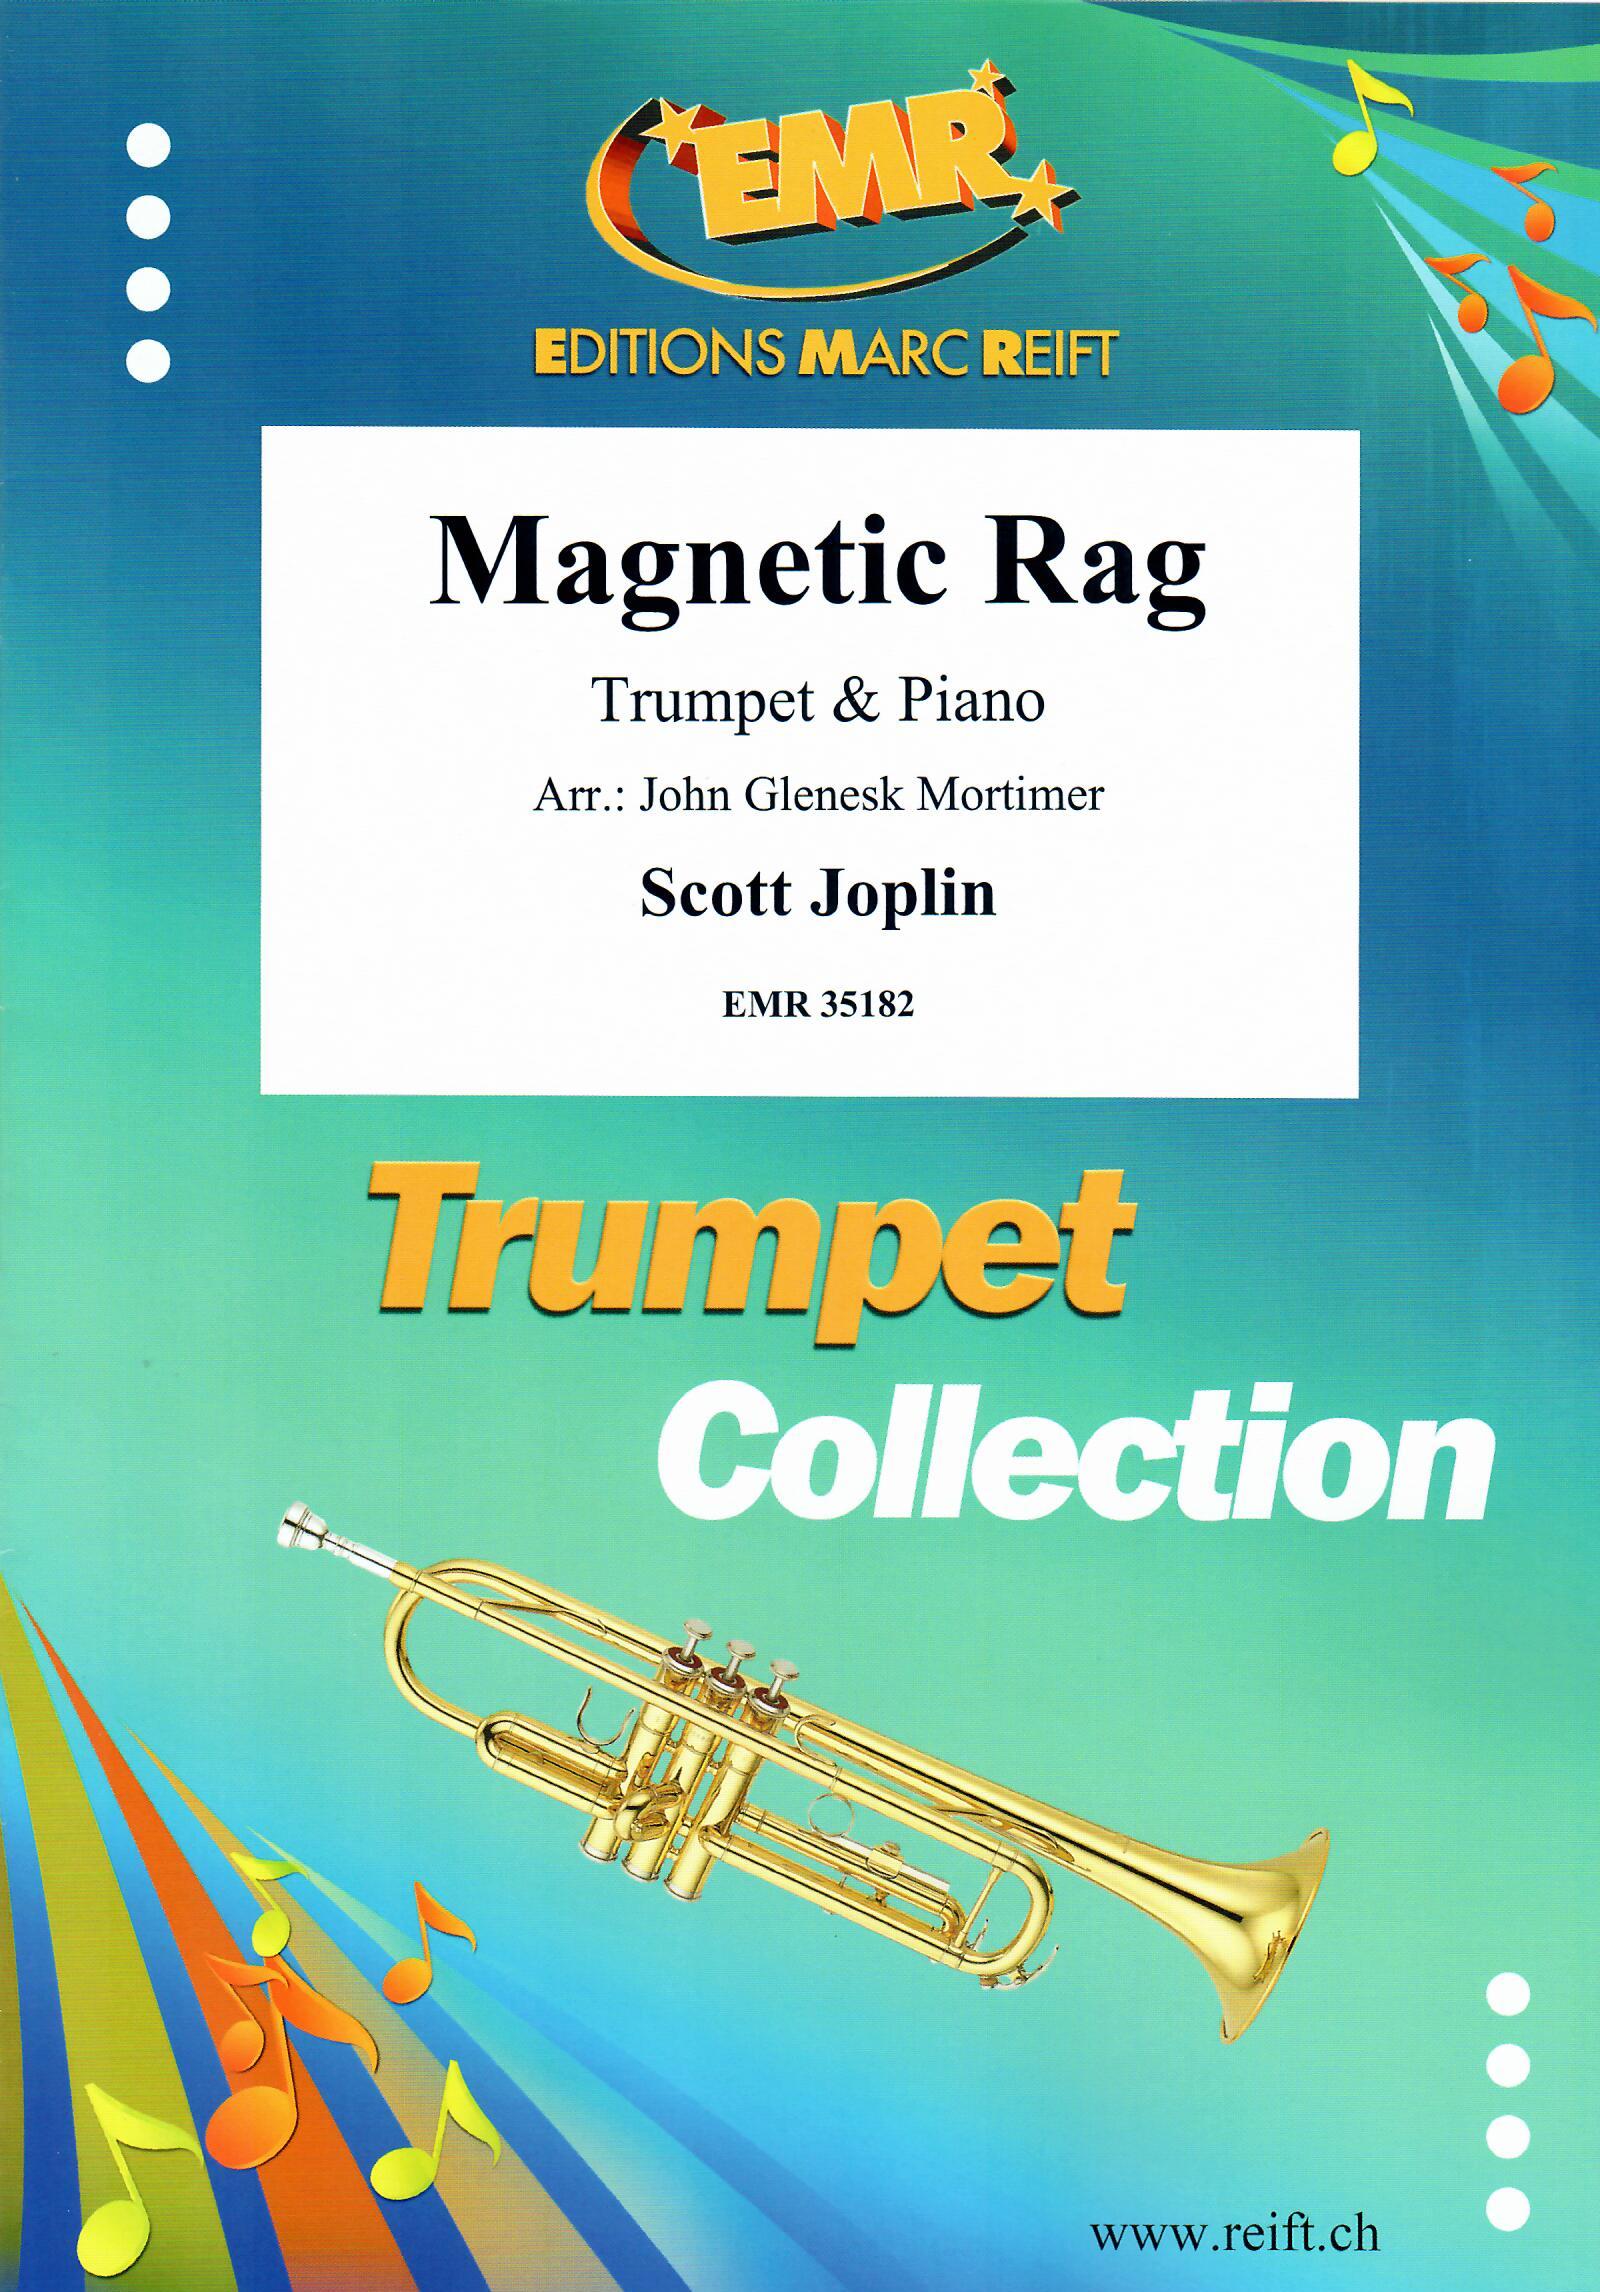 MAGNETIC RAG, SOLOS - B♭. Cornet/Trumpet with Piano